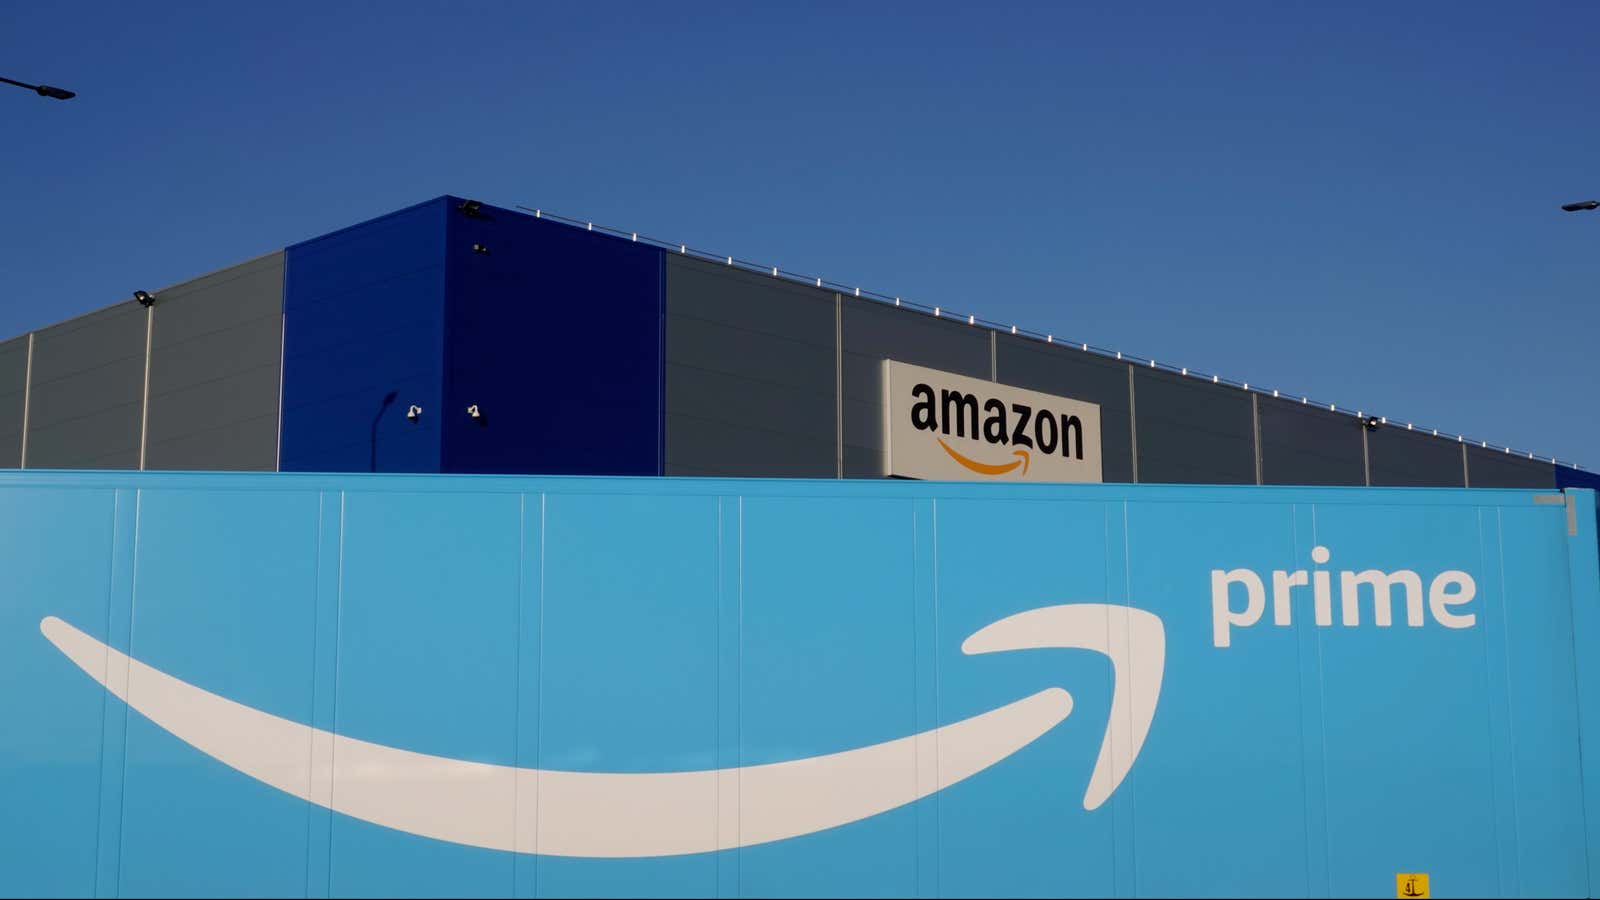 Amazon’s Prime Day has become a key way the company signs up new subscribers, including in many countries outside the US.